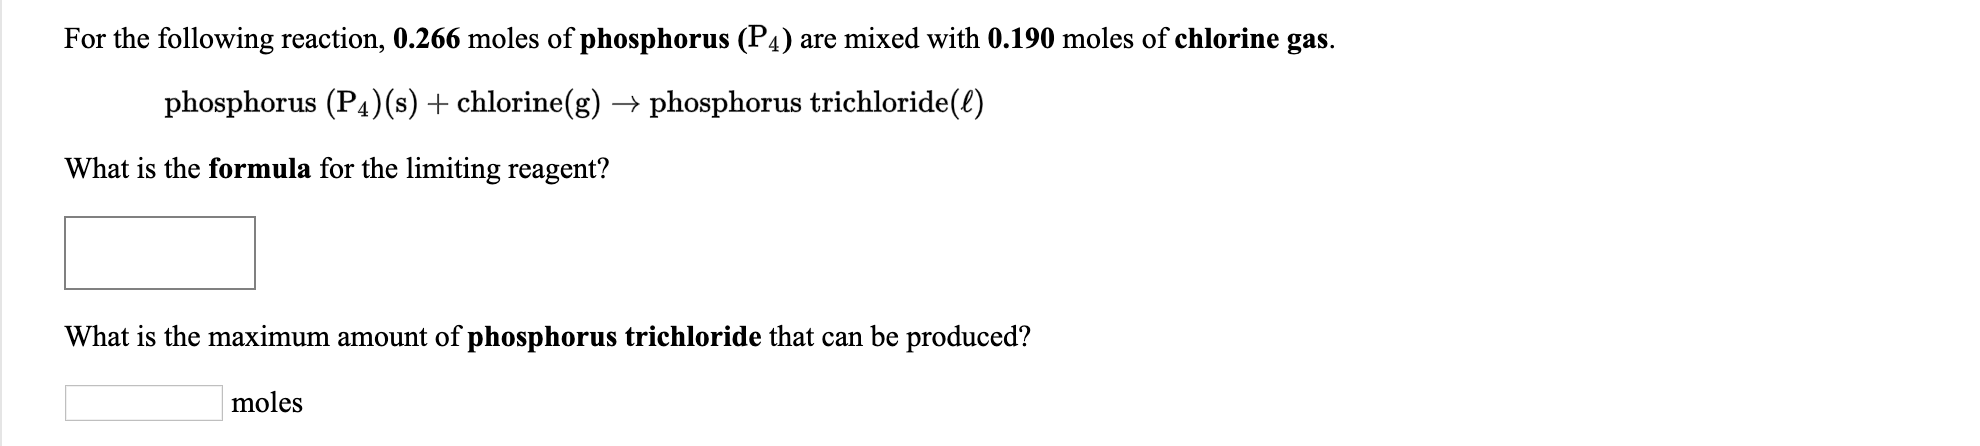 For the following reaction, 0.266 moles of
phosphorus (P4) (s) + chlorine(
